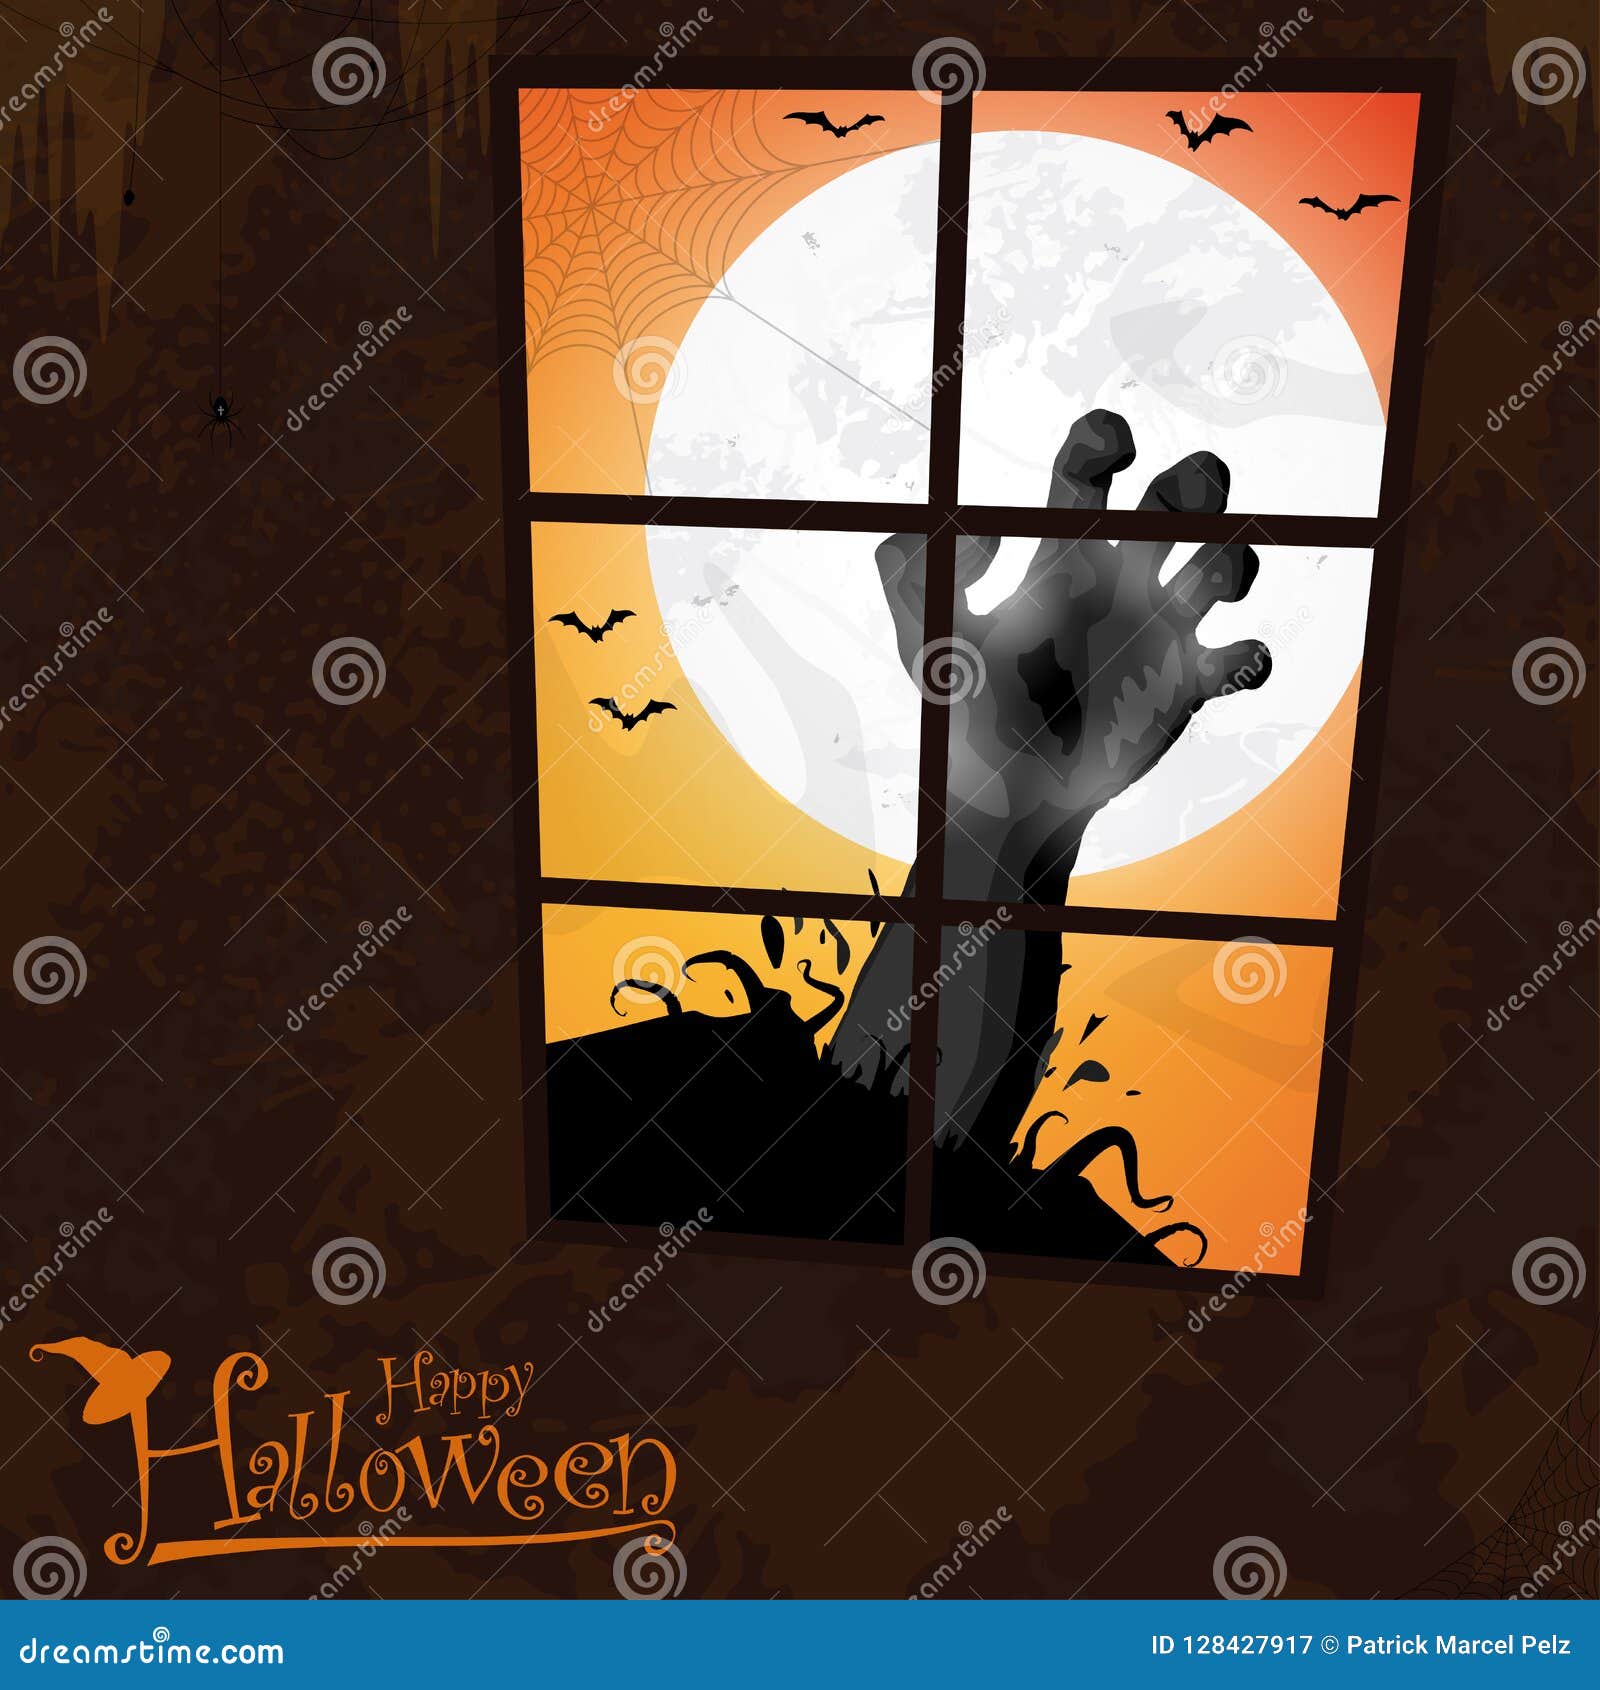 Zombie Hand You Can See Through A Window Stock Vector - Illustration of